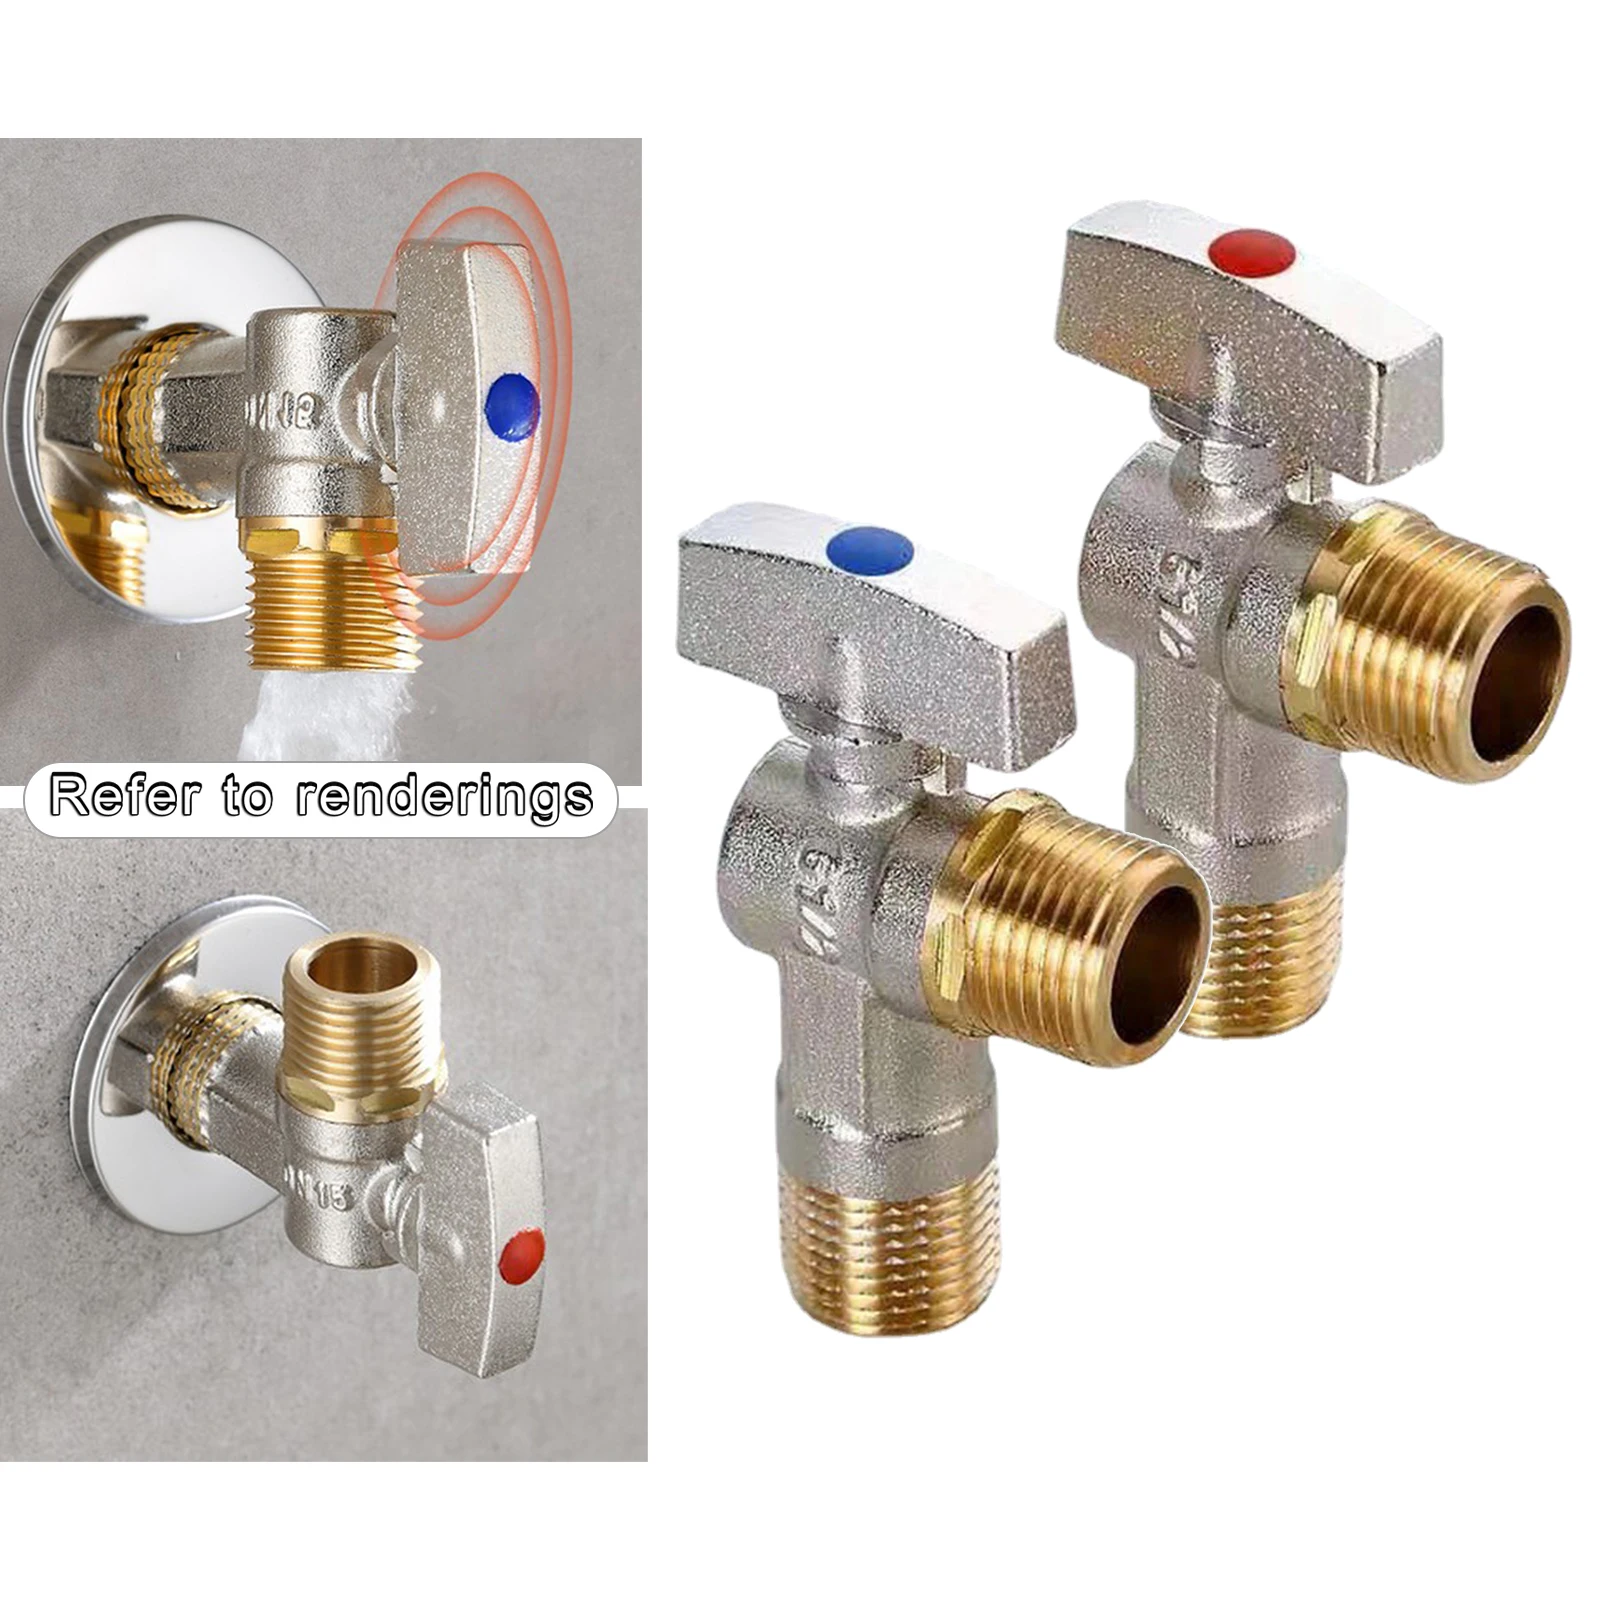 Brass Flow Angle Value Plumbing Fitting Triangle Water Water Shut Off Angle for Faucet Sink Toilet Bathroom